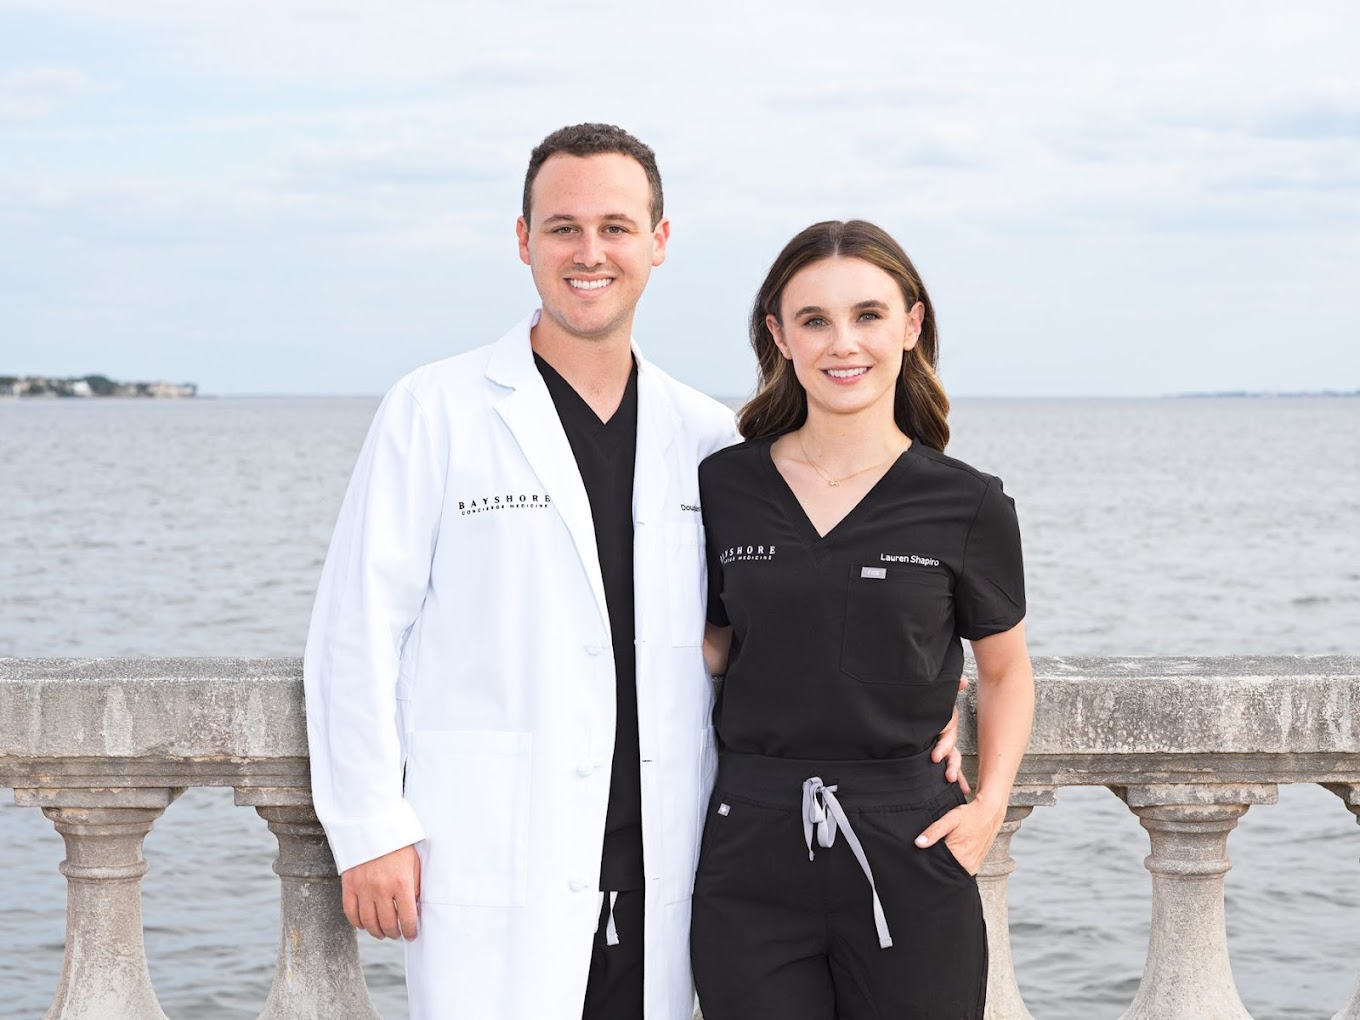 Bayshore Concierge Medicine Announces the Opening of Its First Location in Tampa, FL